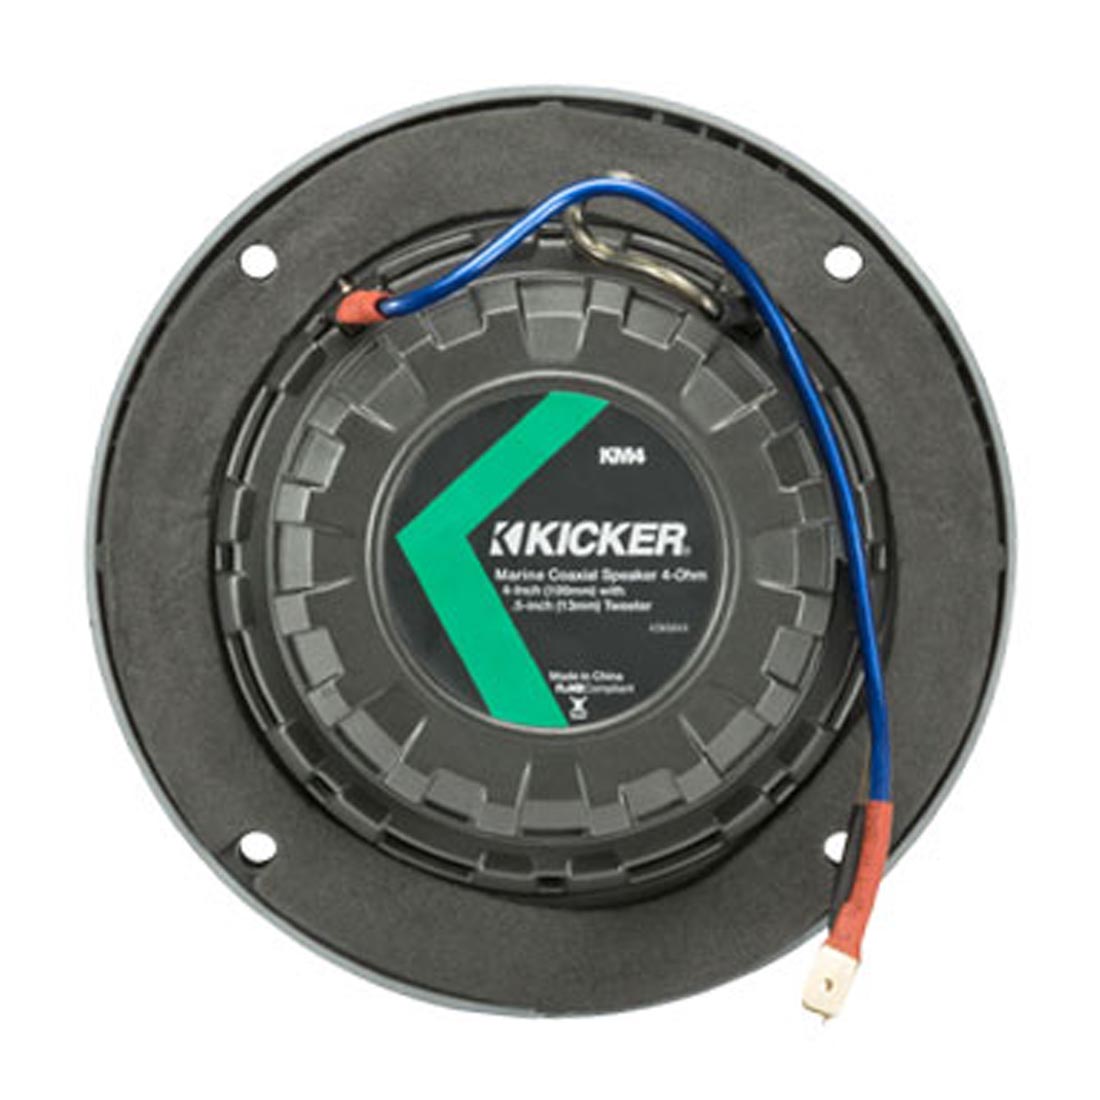 Kicker 45KM44 4″ 2-Way 4-Ohm Marine Coaxial Speakers with Charcoal and White Grilles